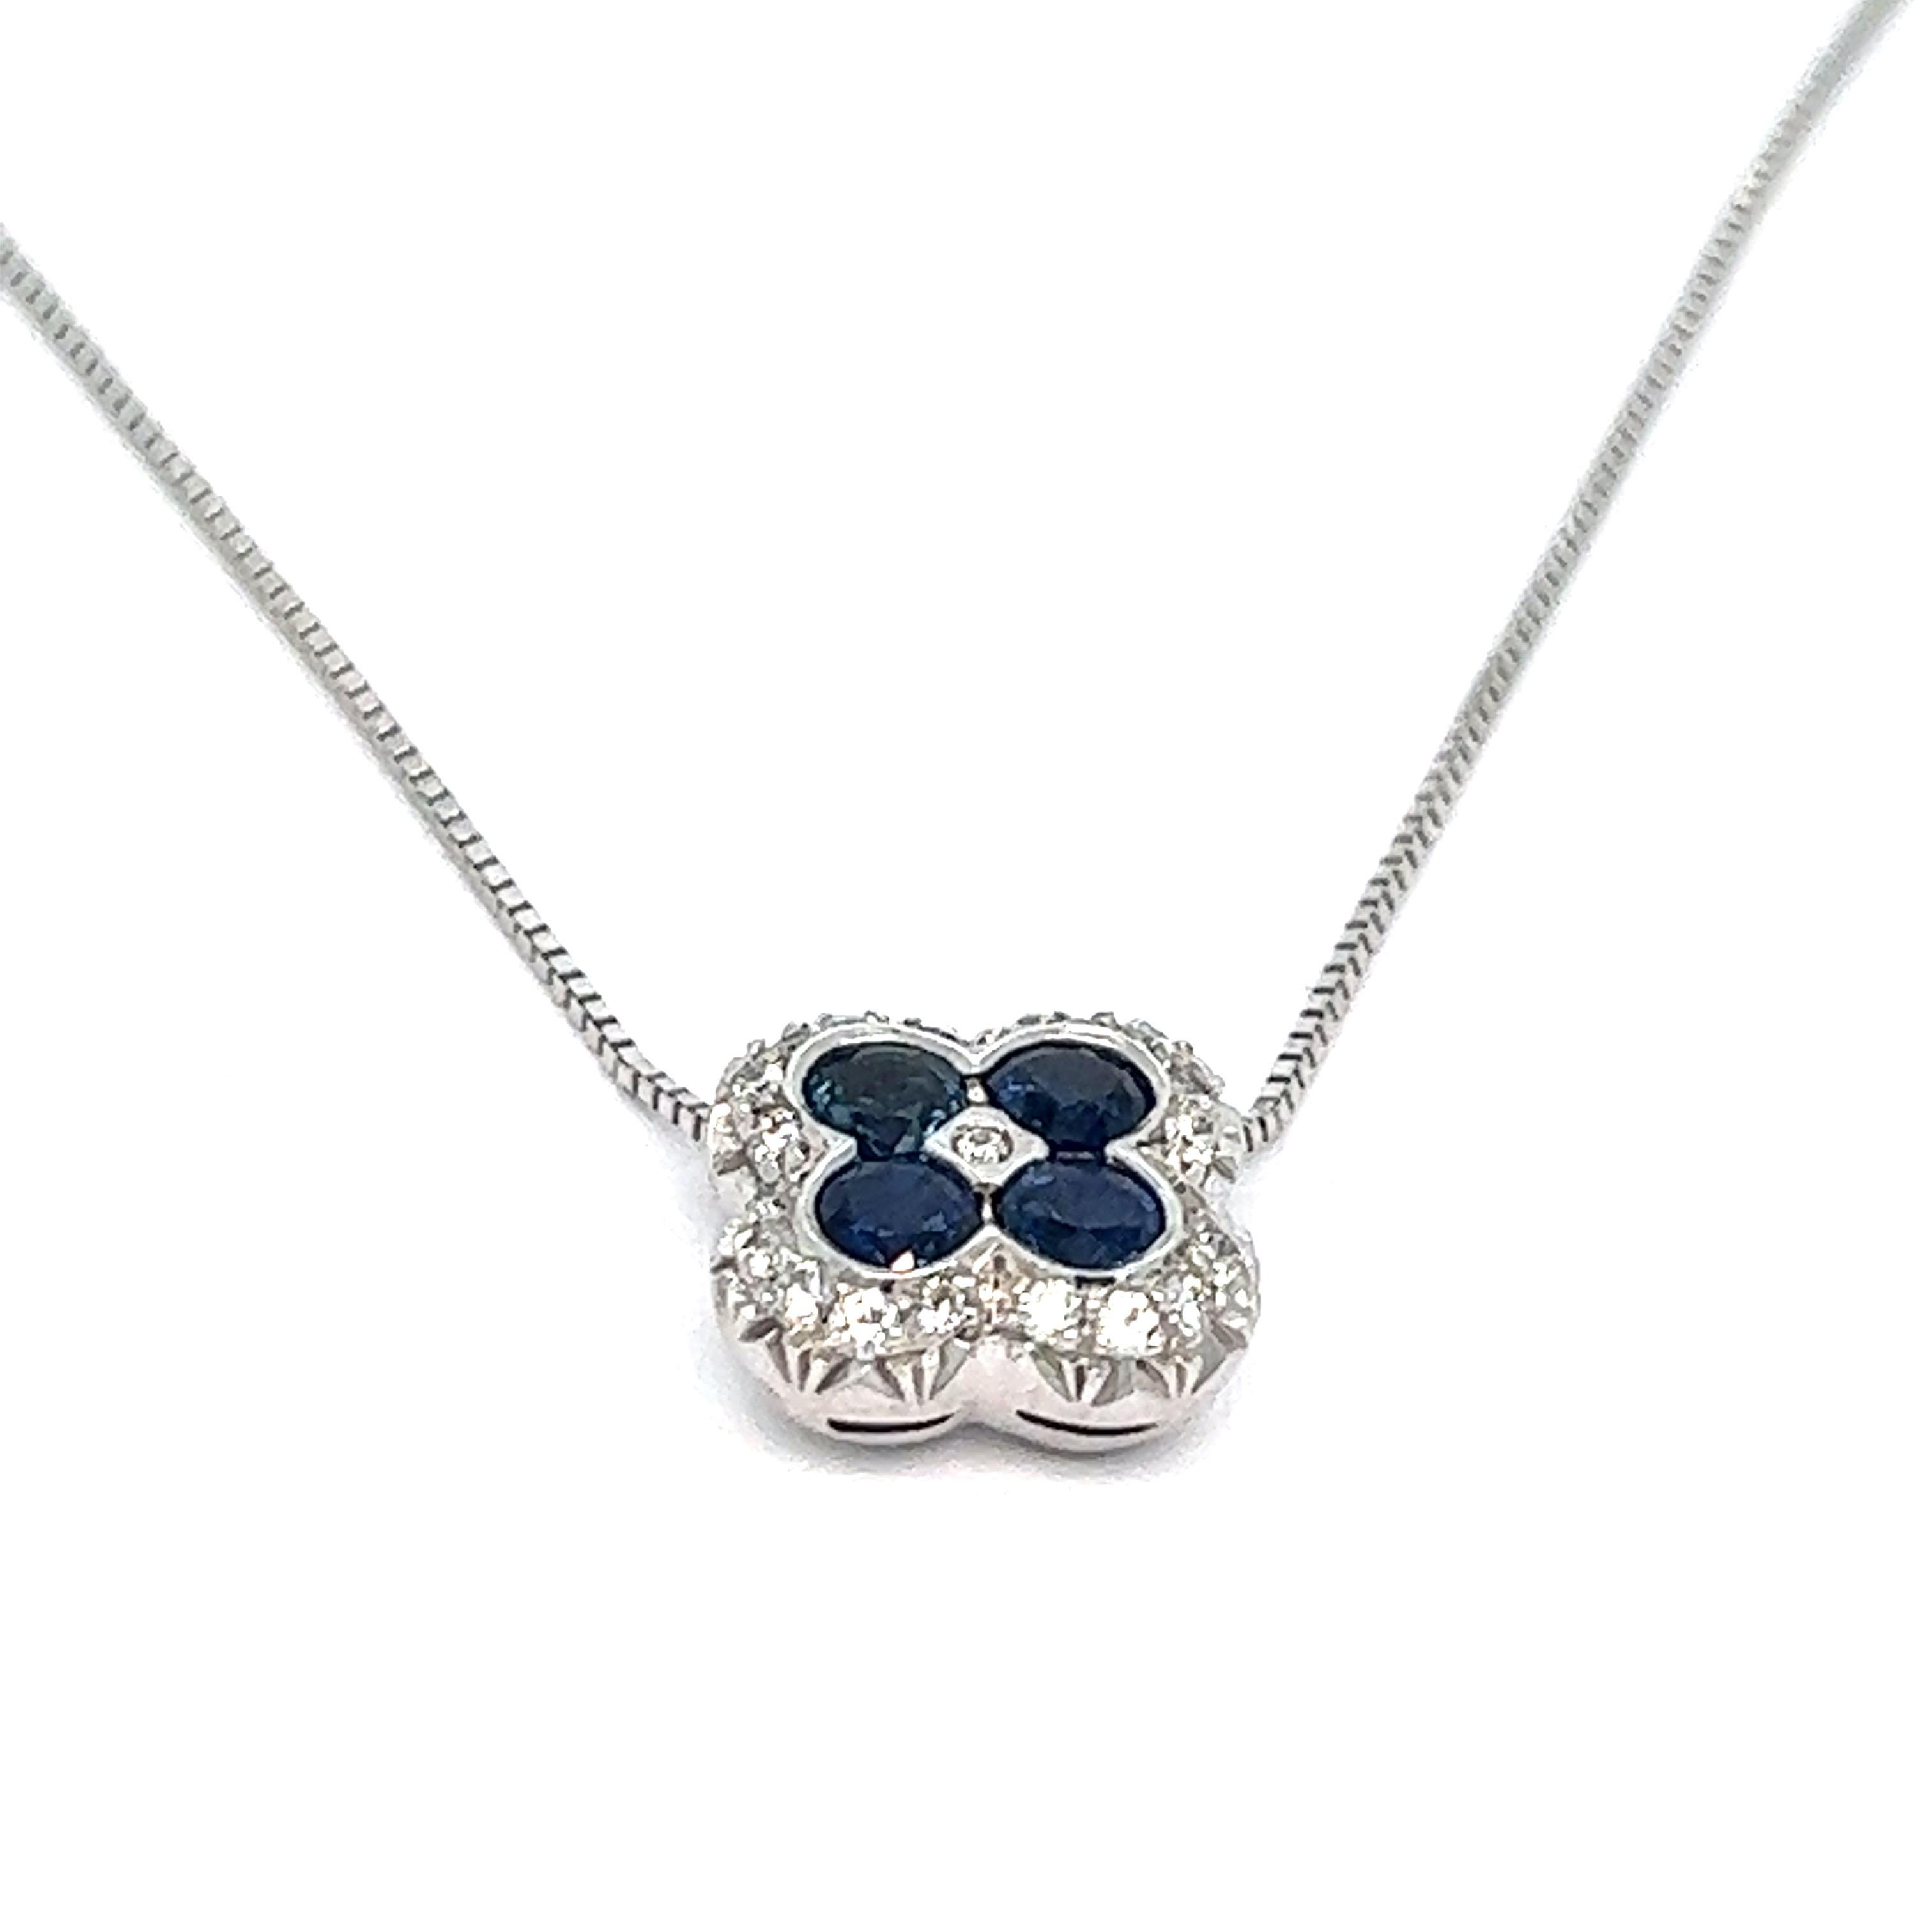 Sapphire diamond gold necklace 

Round-cut sapphires of approximately 0.40 carat, 18 karat white gold; marked 750

Size: width 11 mm, length 11 mm; chain length 16.5 inches
Total weight: 4.3 grams